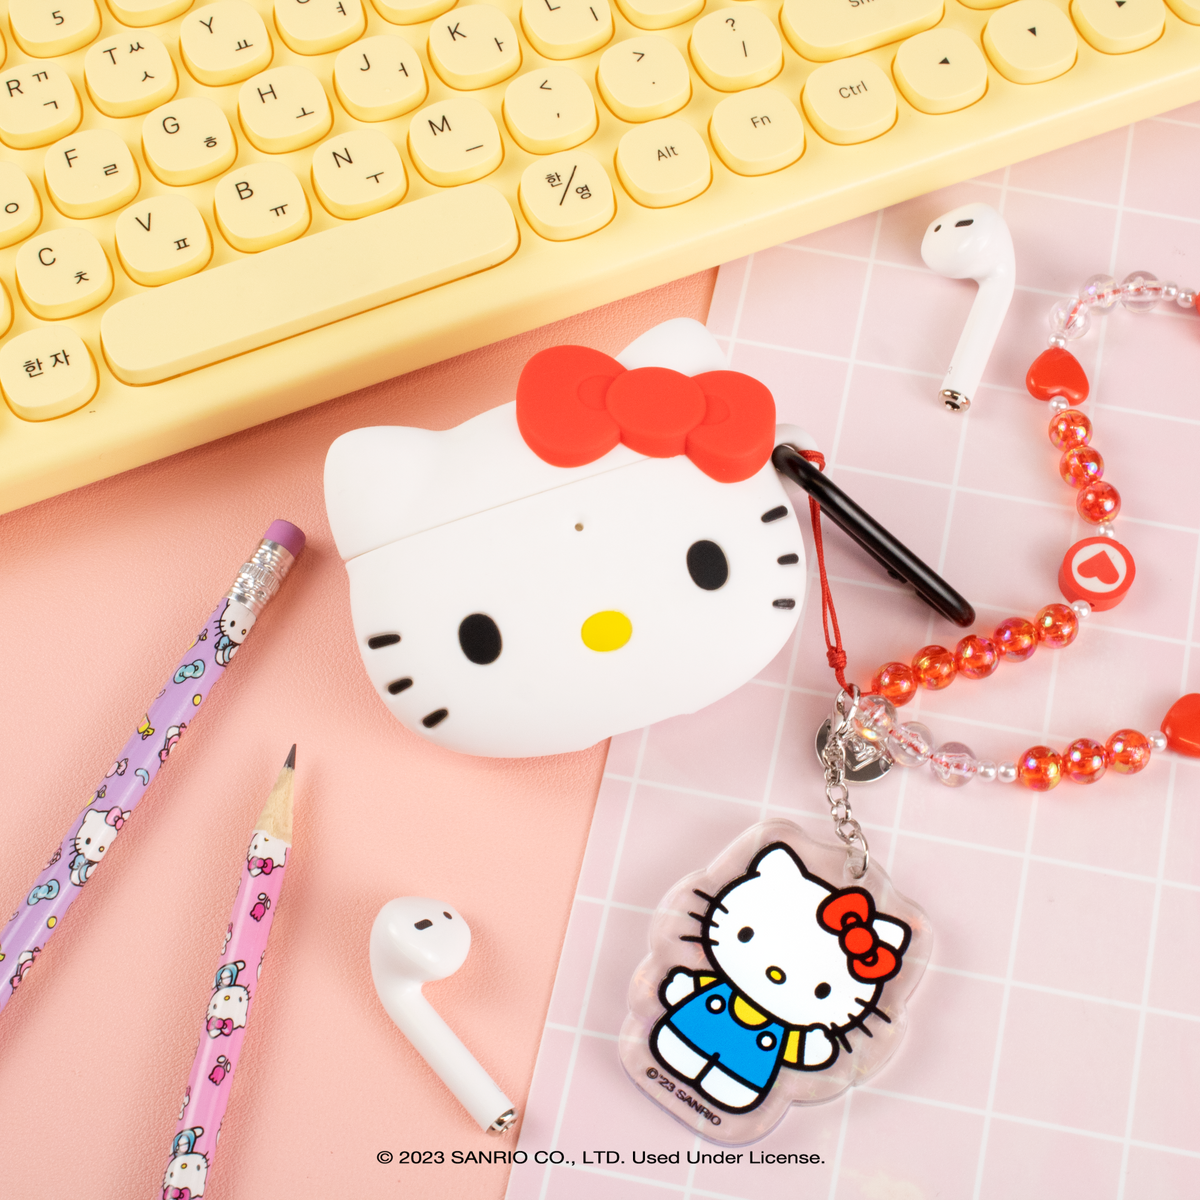 Hello Kitty AirPods Case AirPods Case Hamee.com - Hamee US   